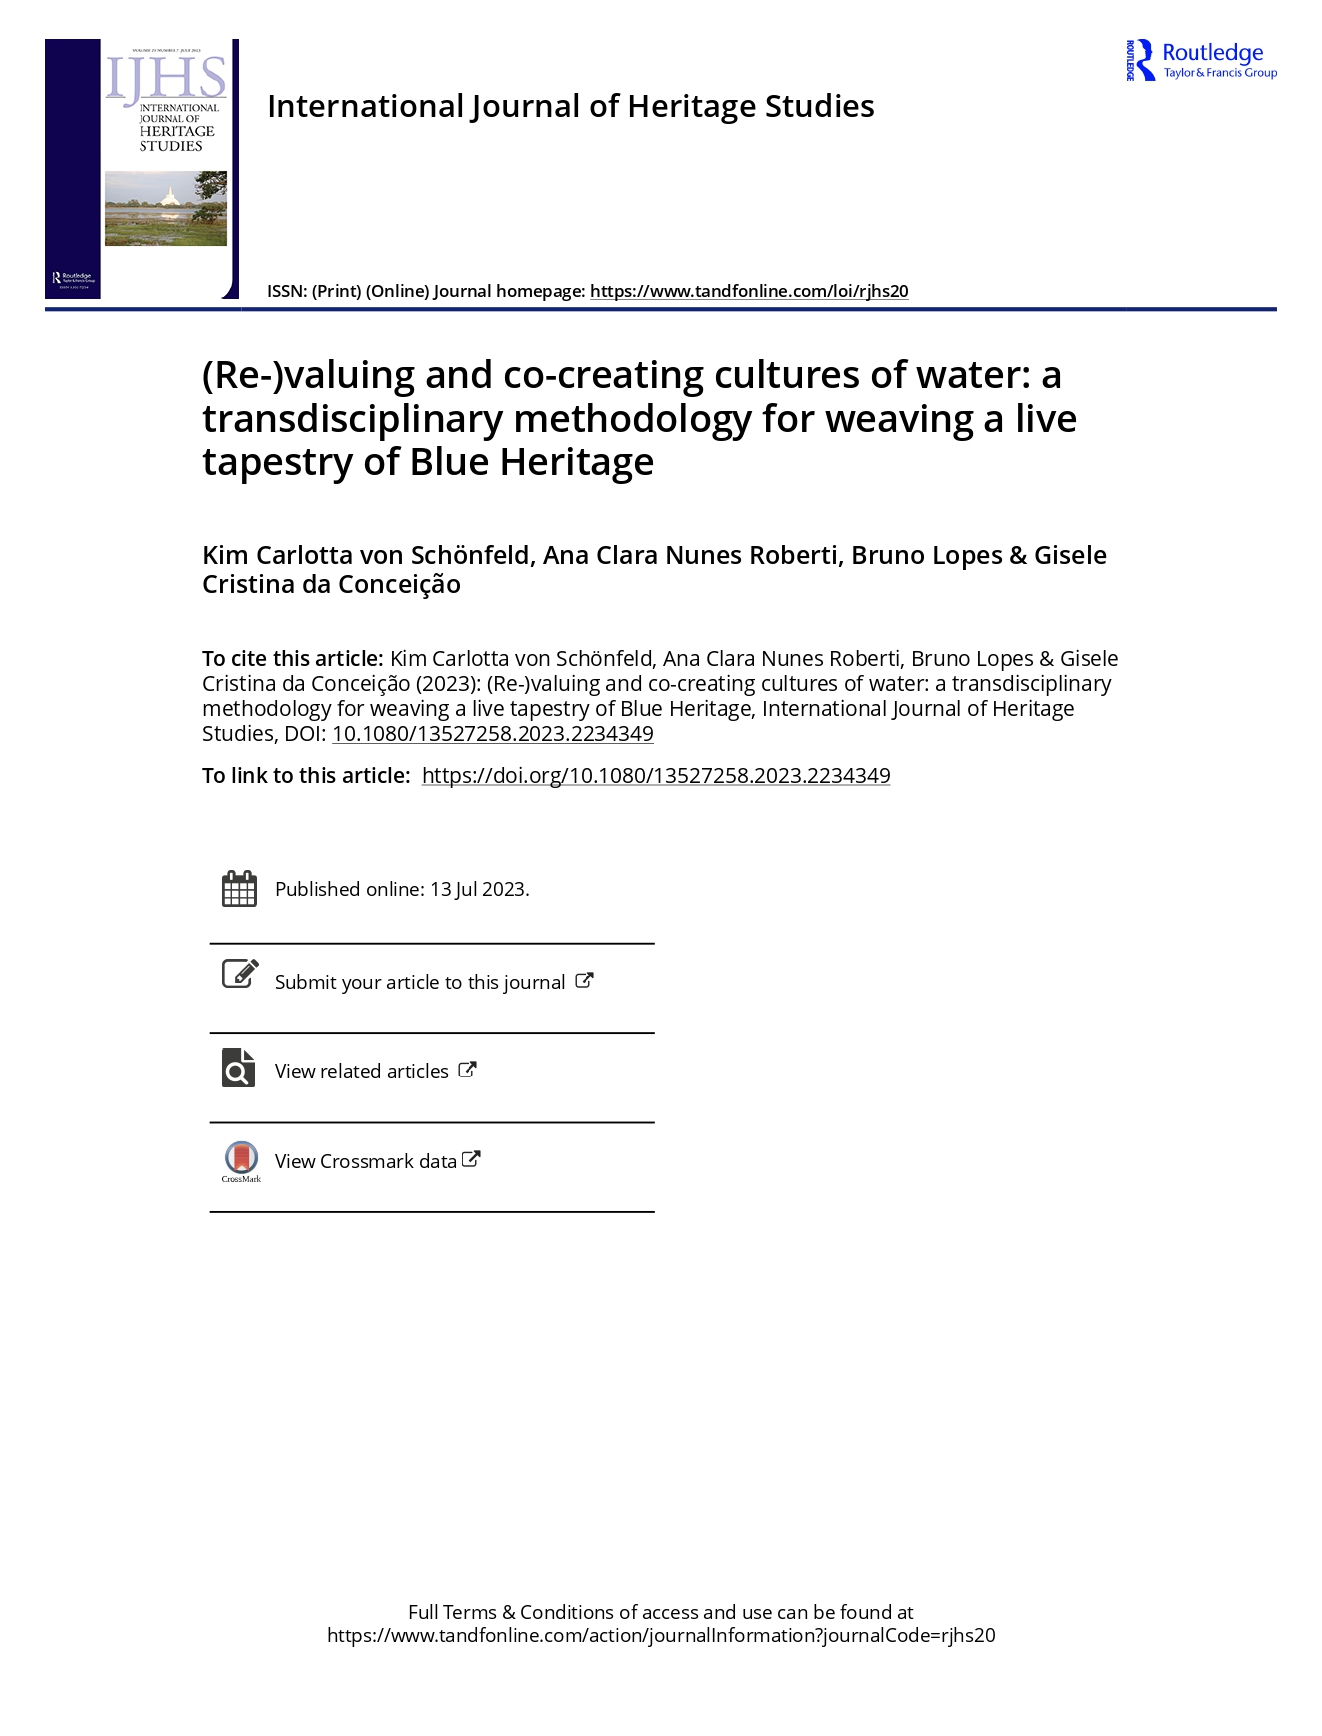 (Re-)valuing and co-creating cultures of water: a transdisciplinary methodology for weaving a live tapestry of Blue Heritage